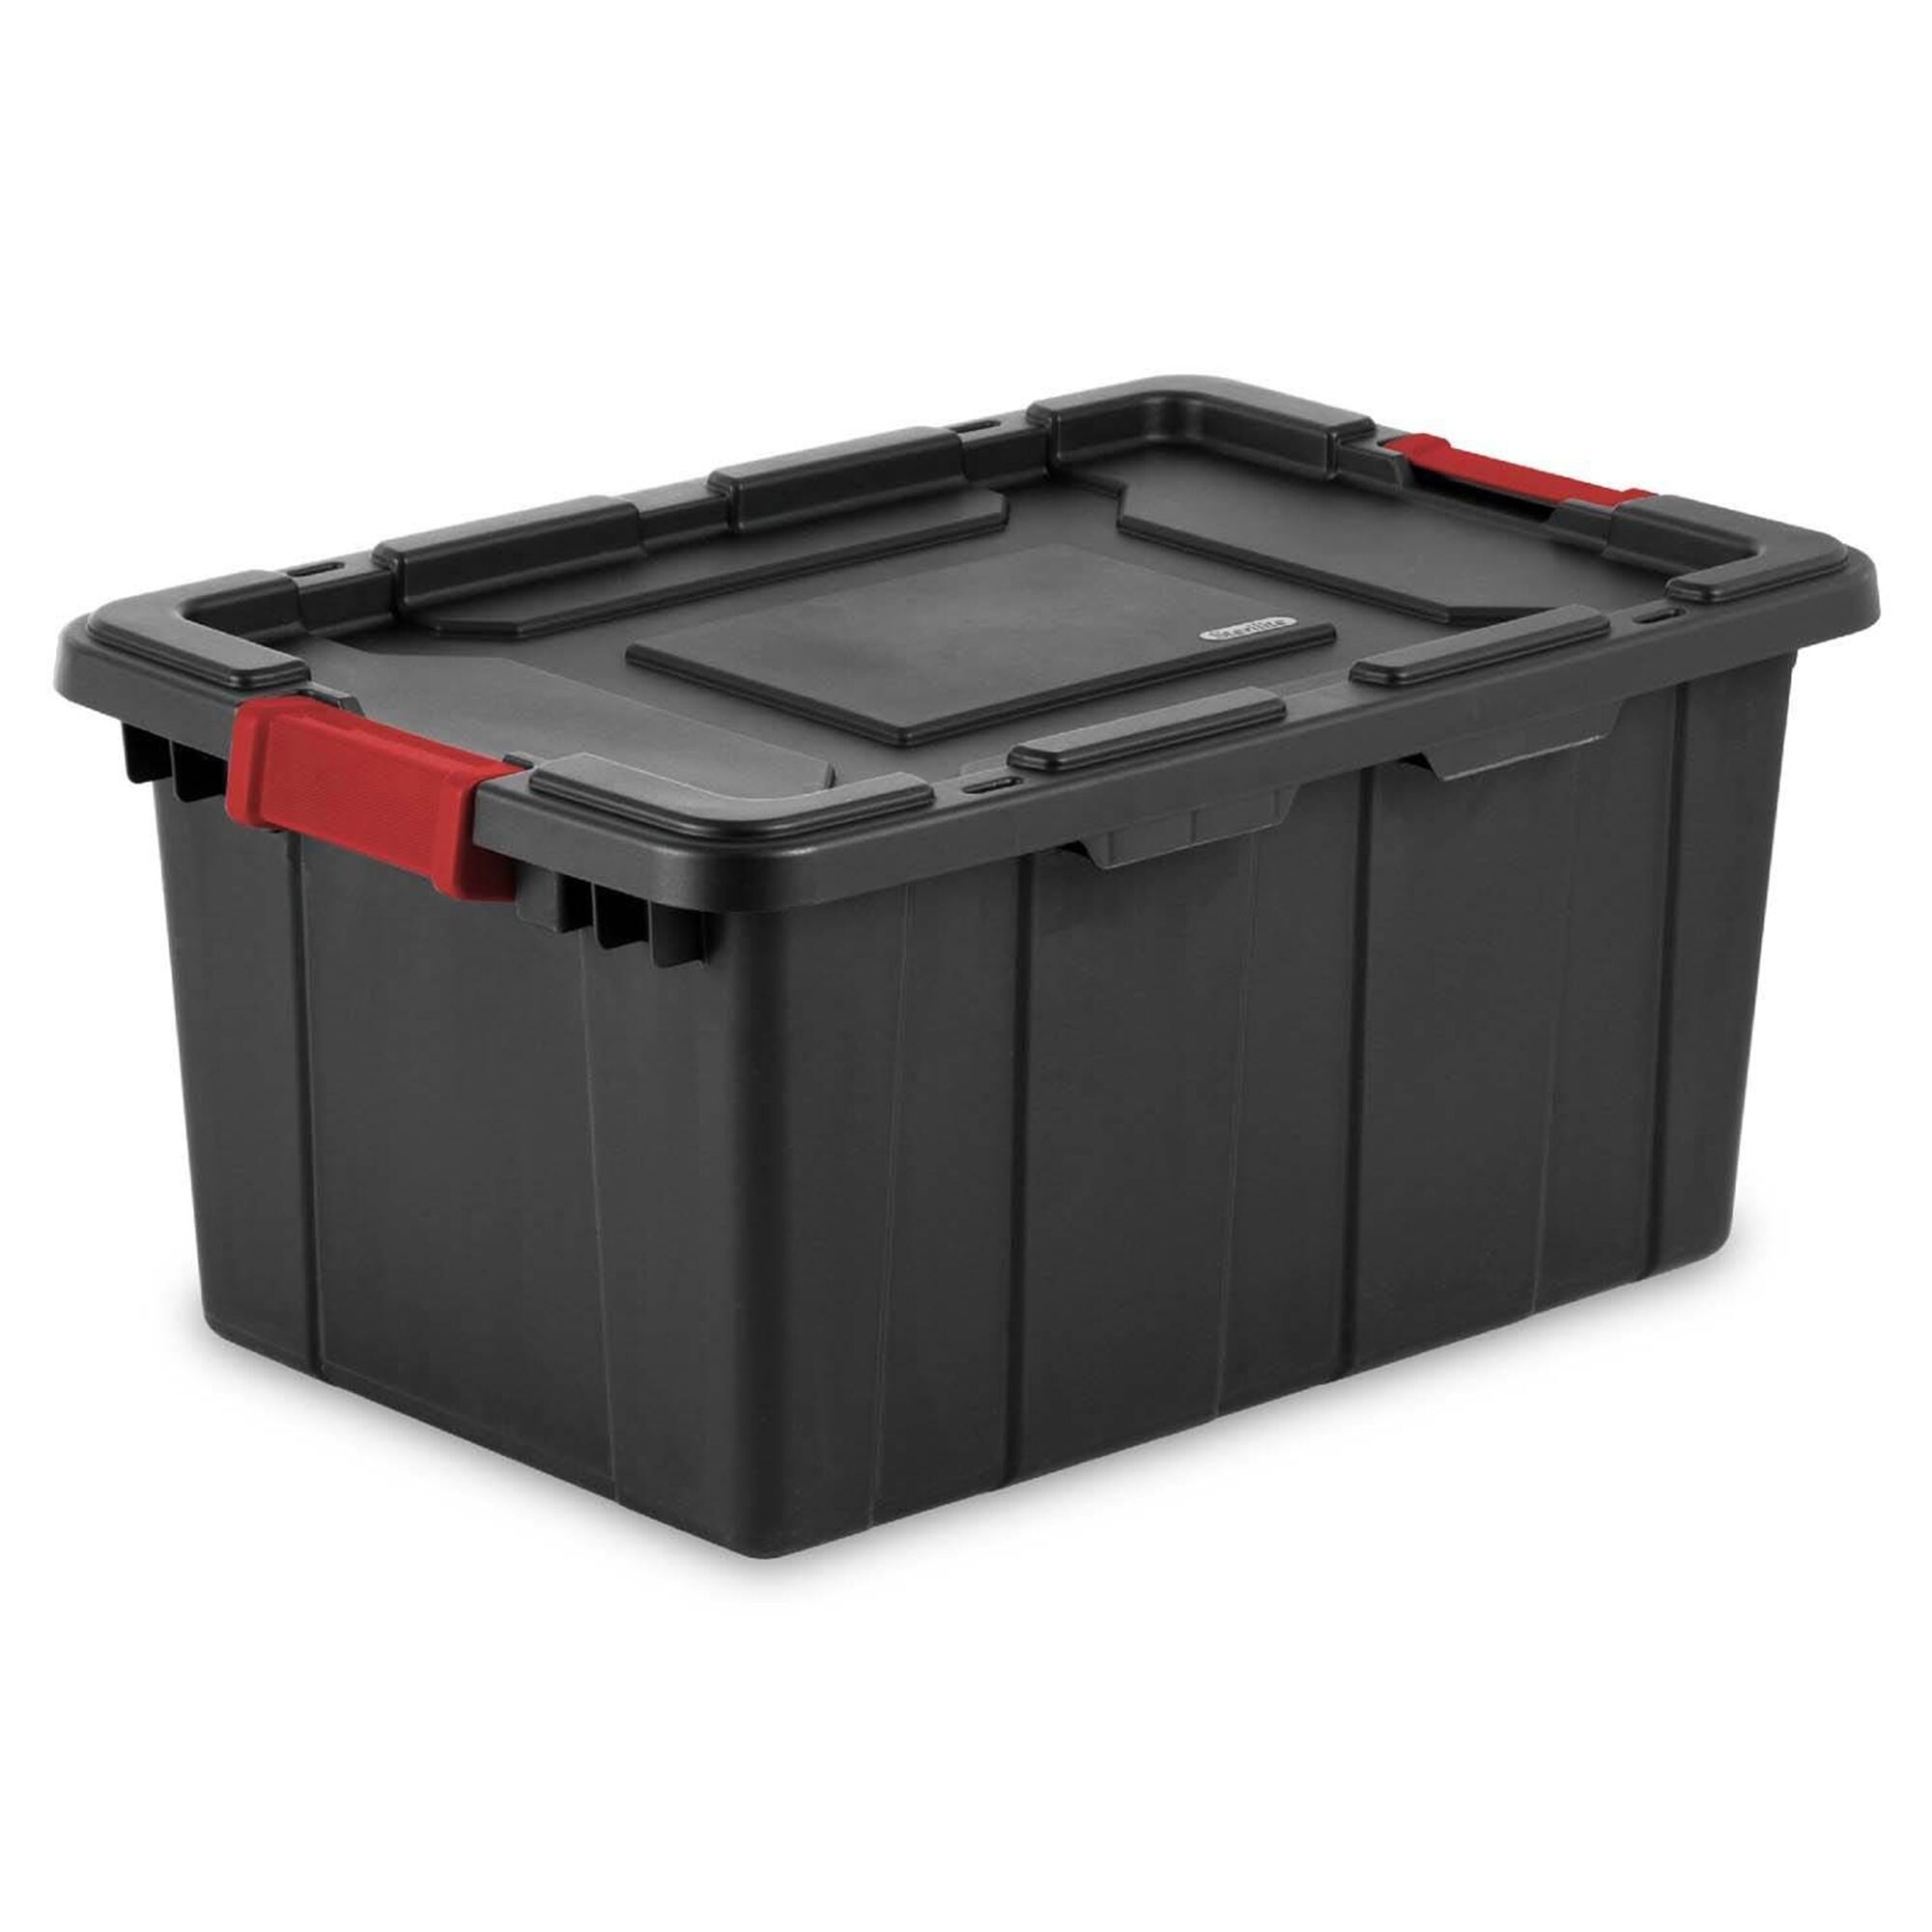 https://ak1.ostkcdn.com/images/products/is/images/direct/e1314202860825f5beef1f8246d01c648c564529/Sterilite-15-Gallon-Durable-Rugged-Industrial-Tote-with-Red-Latches%2C-18-Pack.jpg